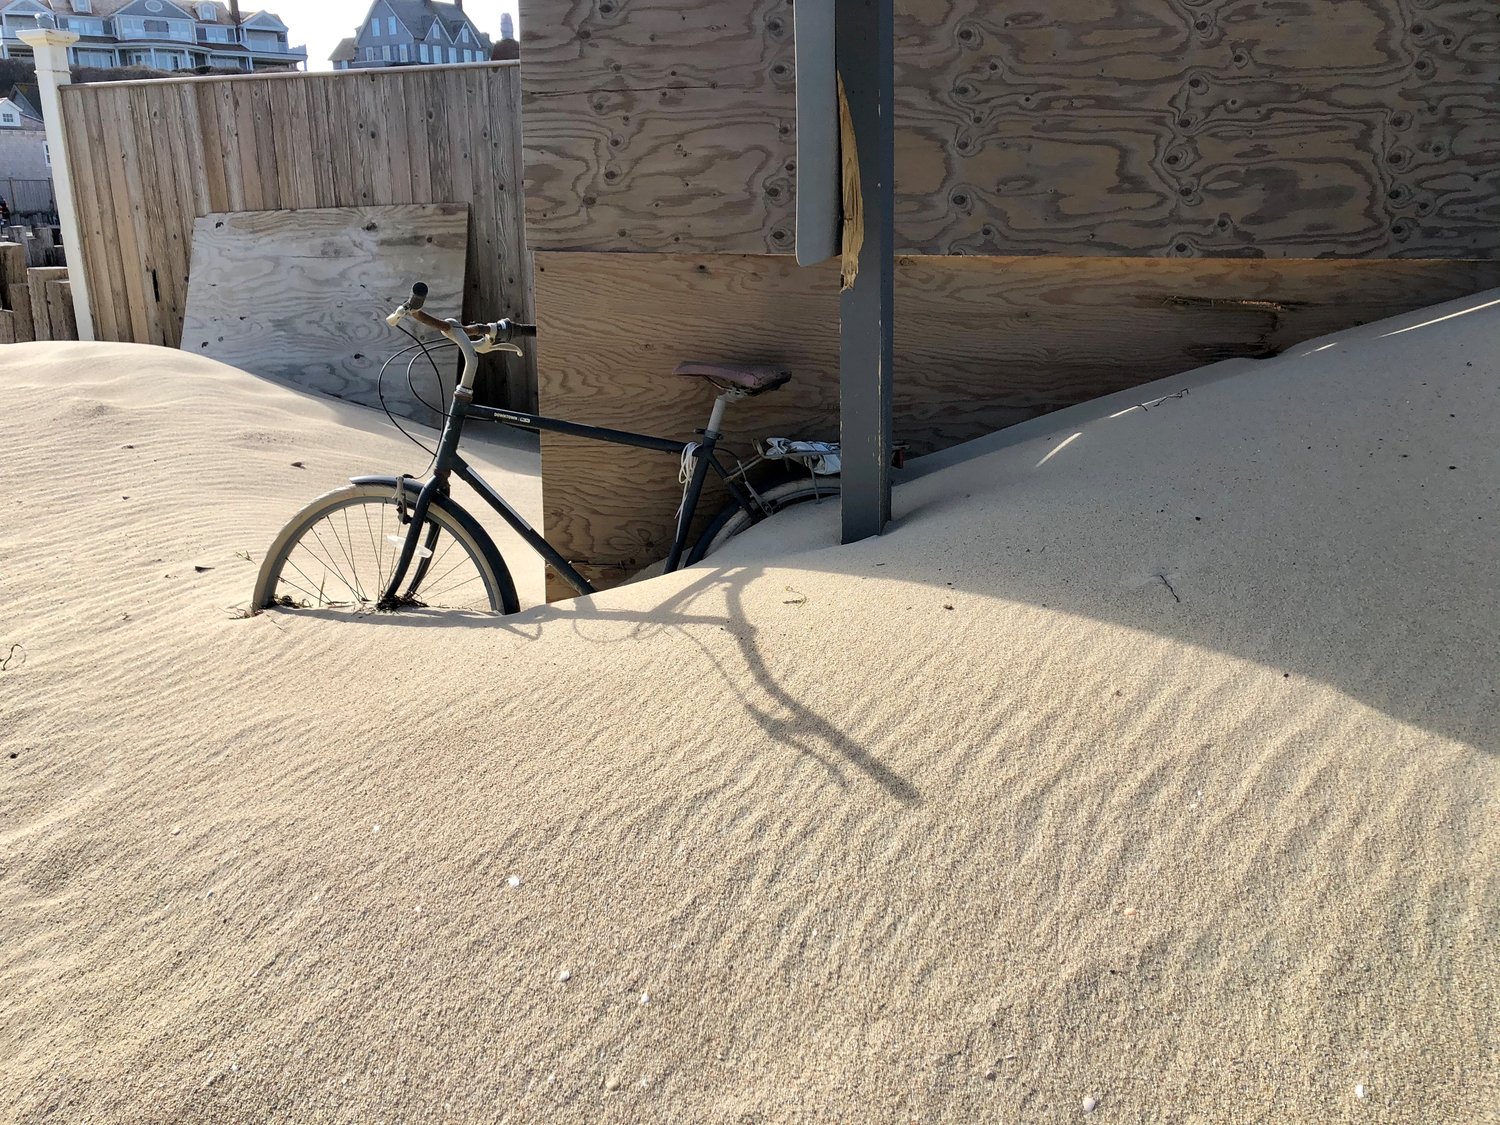 Sand covers a bicycle outside Galley Beach restaurant.